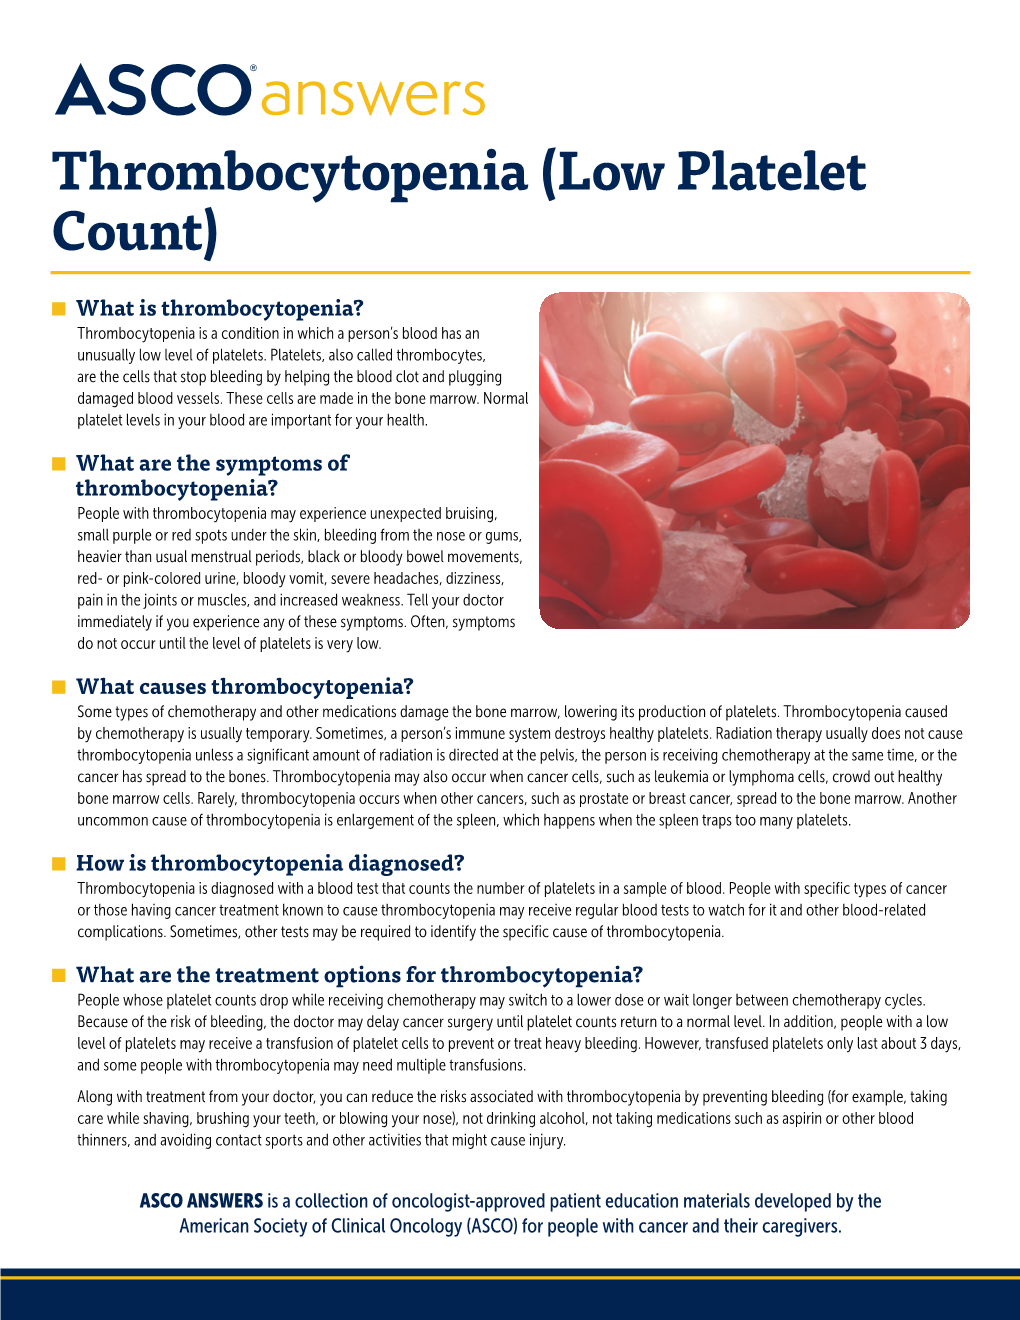 Thrombocytopenia (Low Platelet Count)